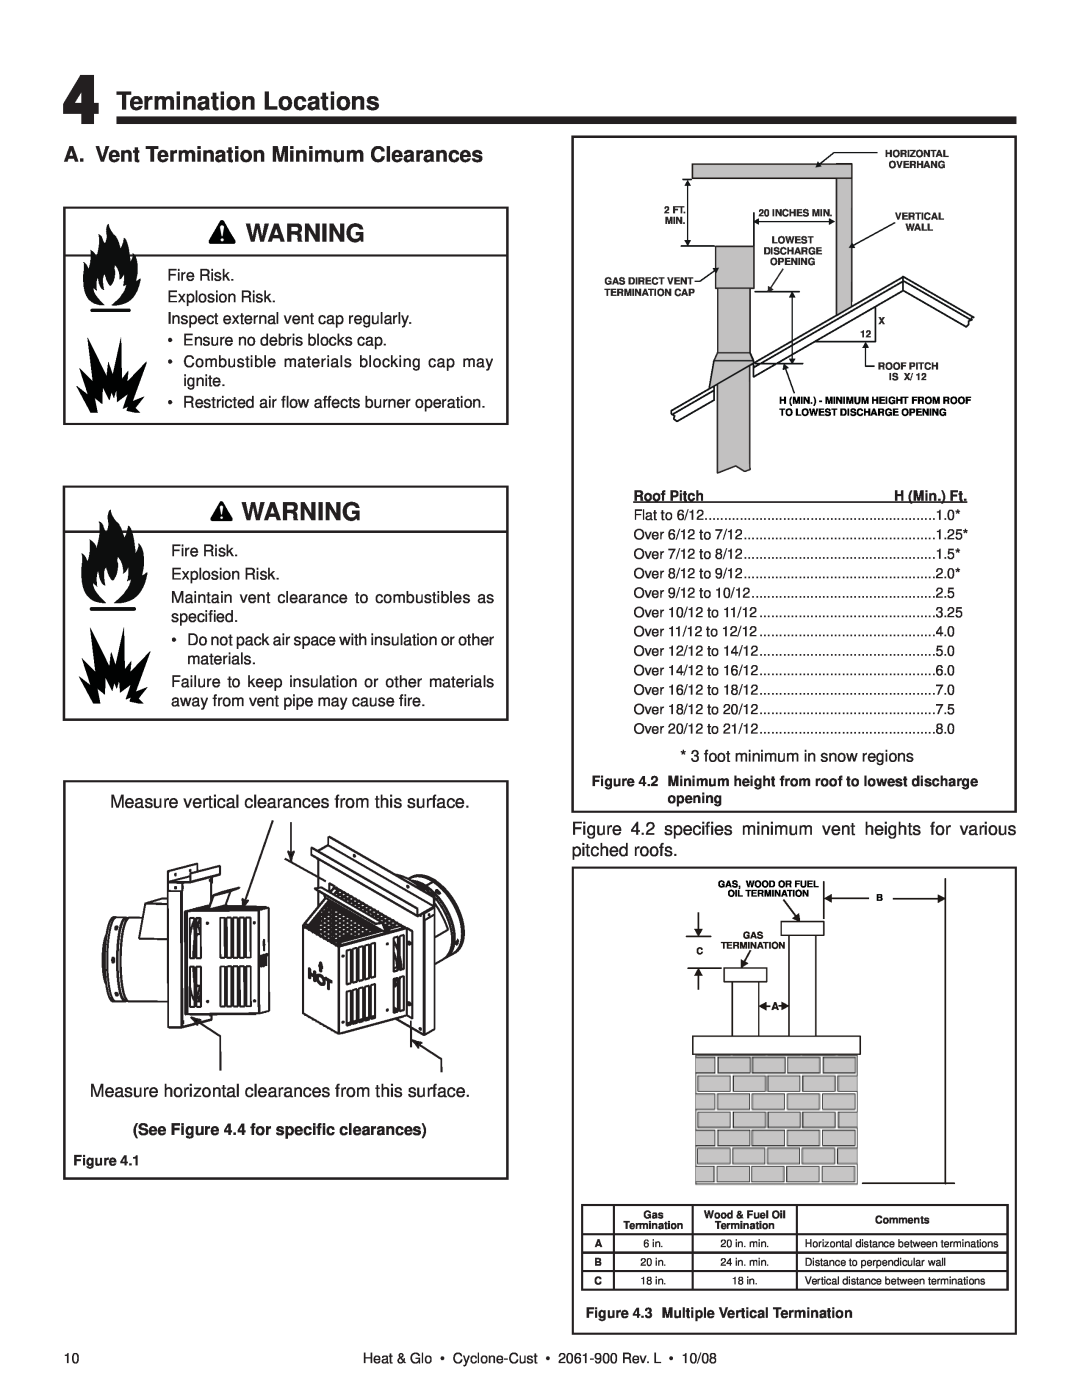 Hearth and Home Technologies Cyclone-Cust Termination Locations, A. Vent Termination Minimum Clearances, Roof Pitch, 1.25 